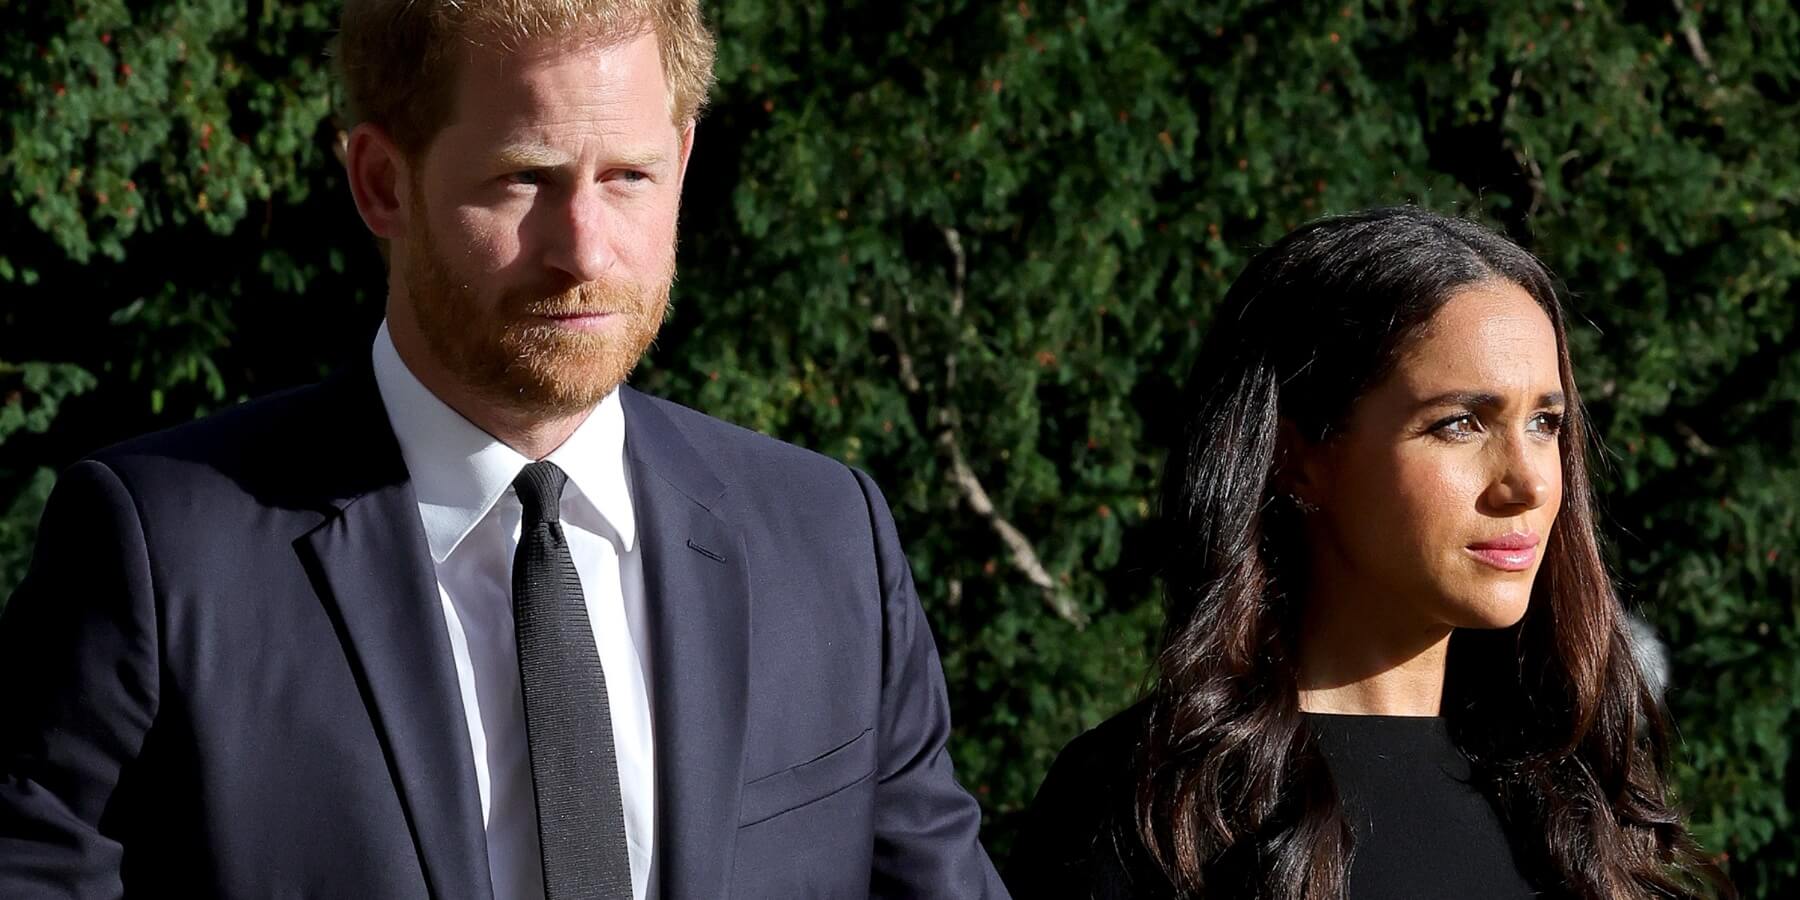 Prince Harry and Meghan Markle appear to have 'divorced' the royal family in every way but name says expert.